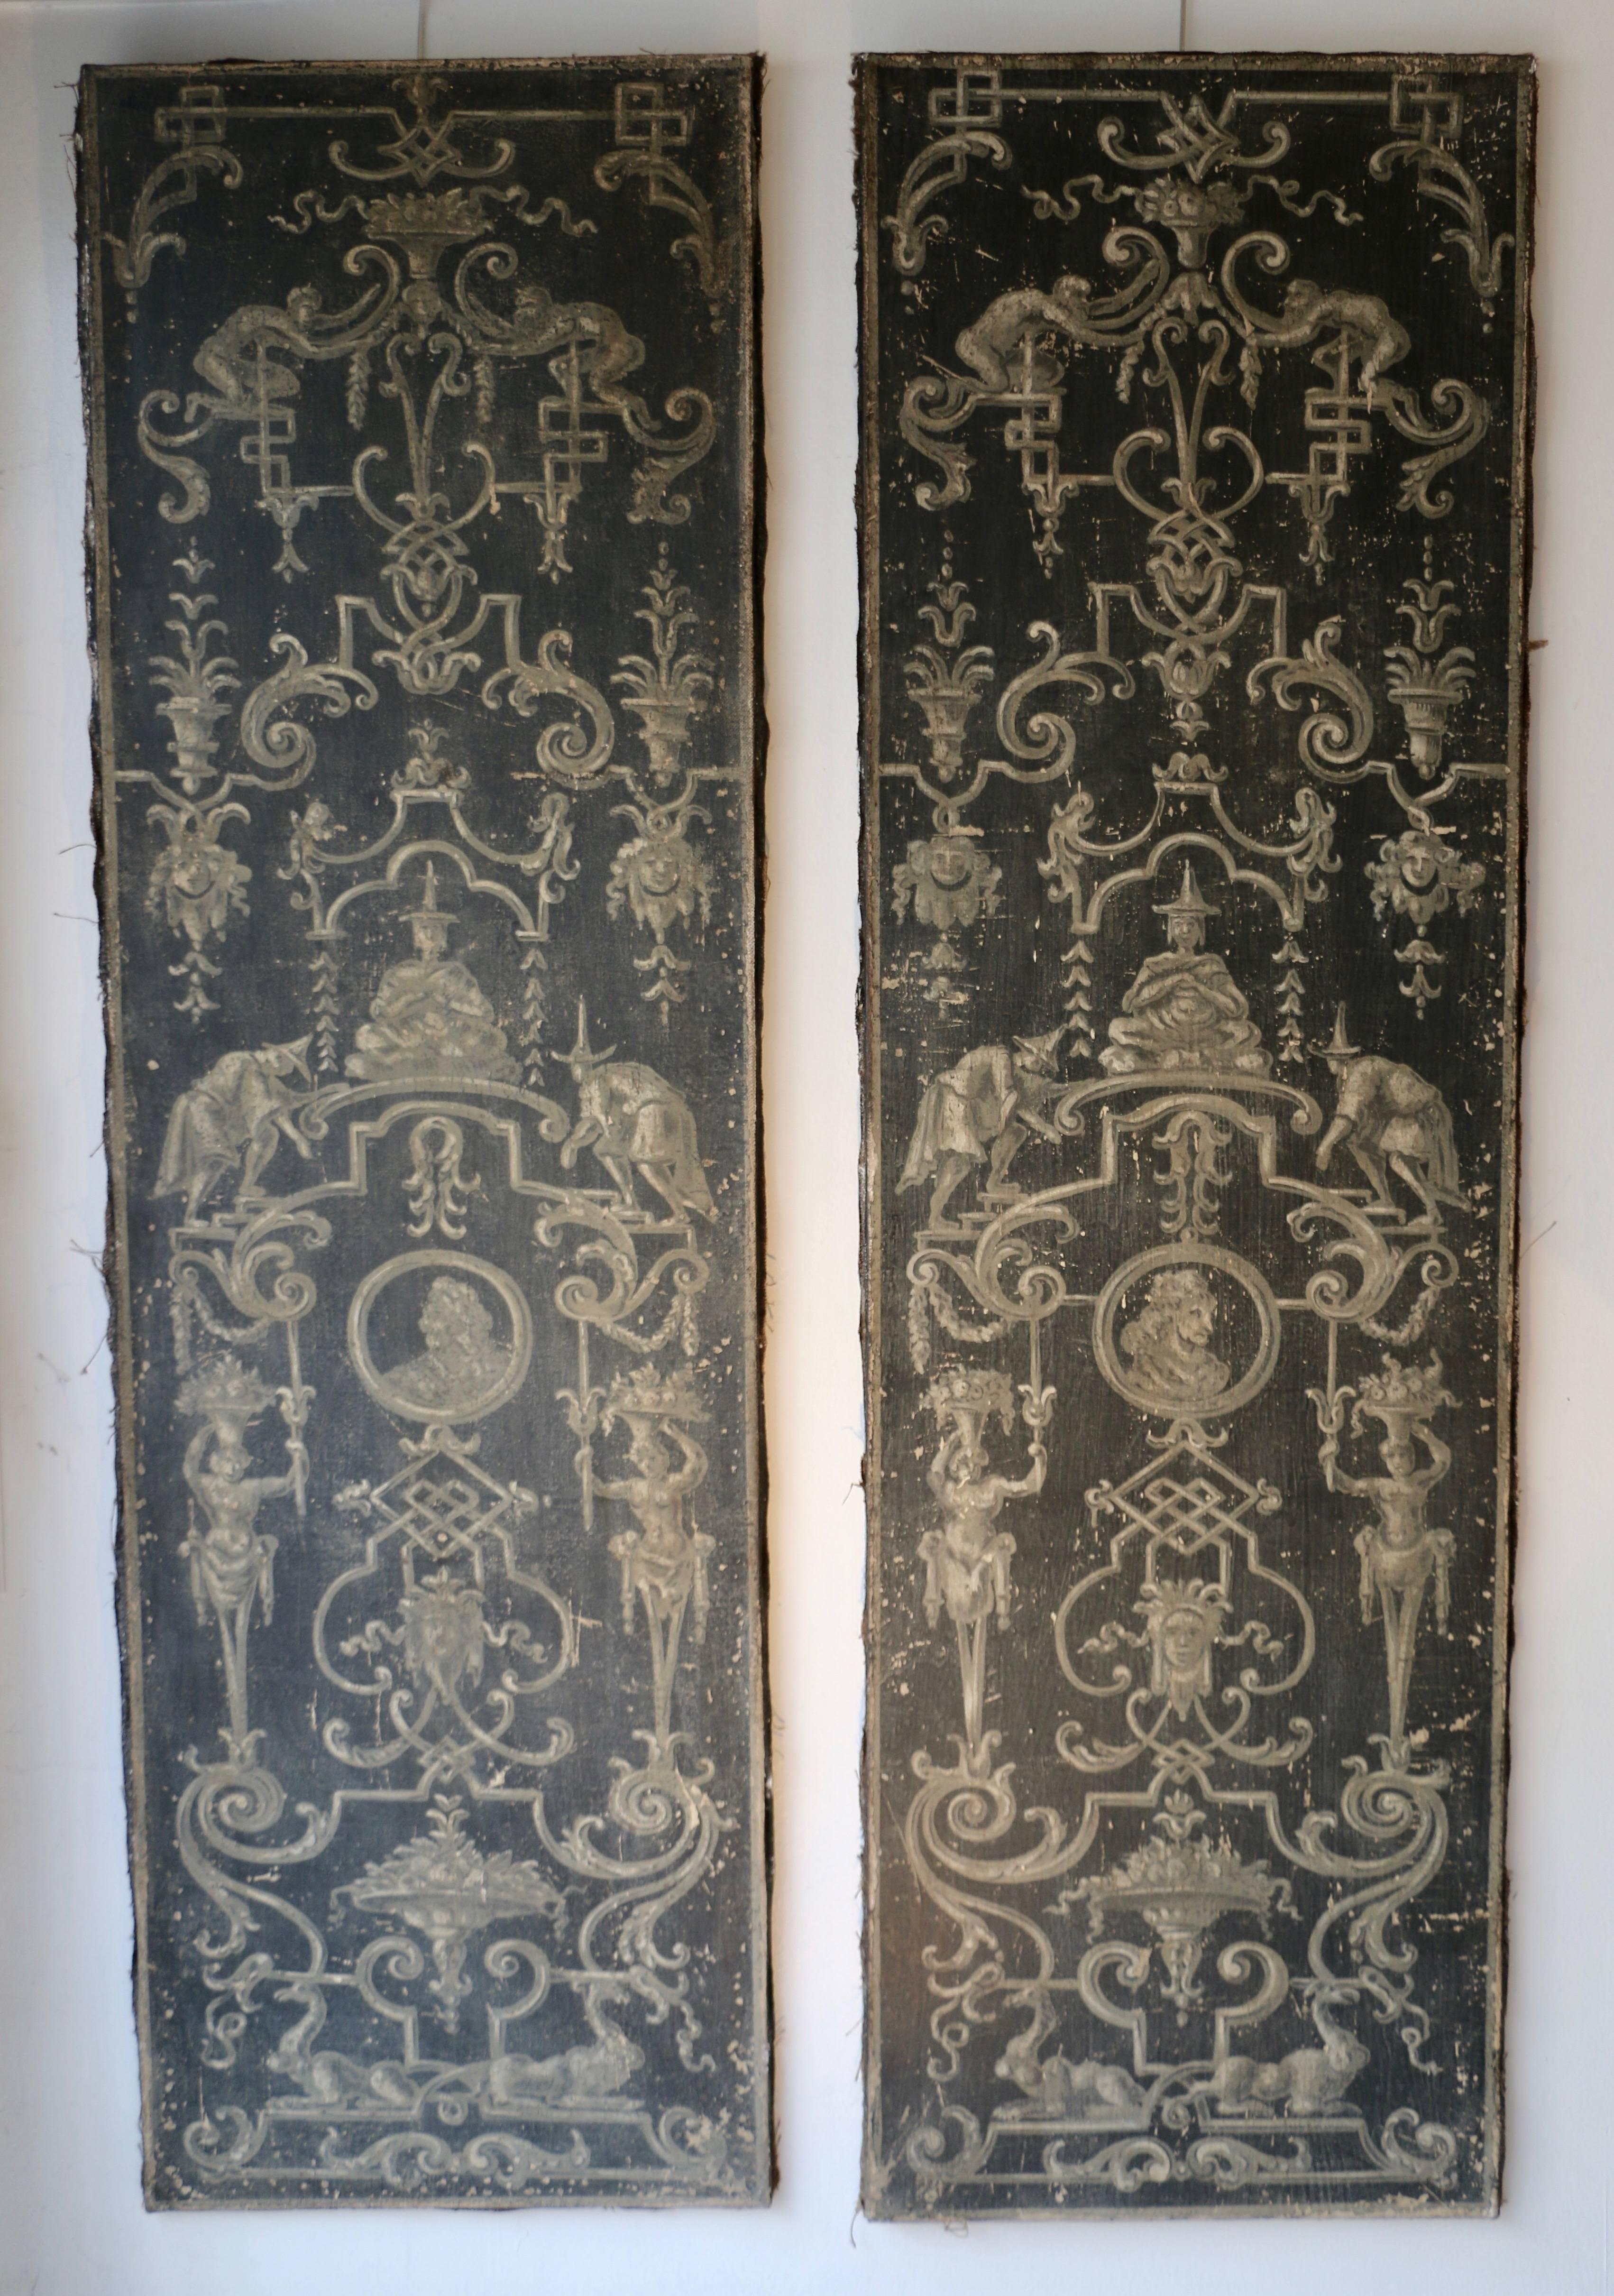 Italy. 20th century. Pair of large very decorative painted canvases. The subject is typical of chinoiseries with its oriental style characters and its eventful architectural motifs.